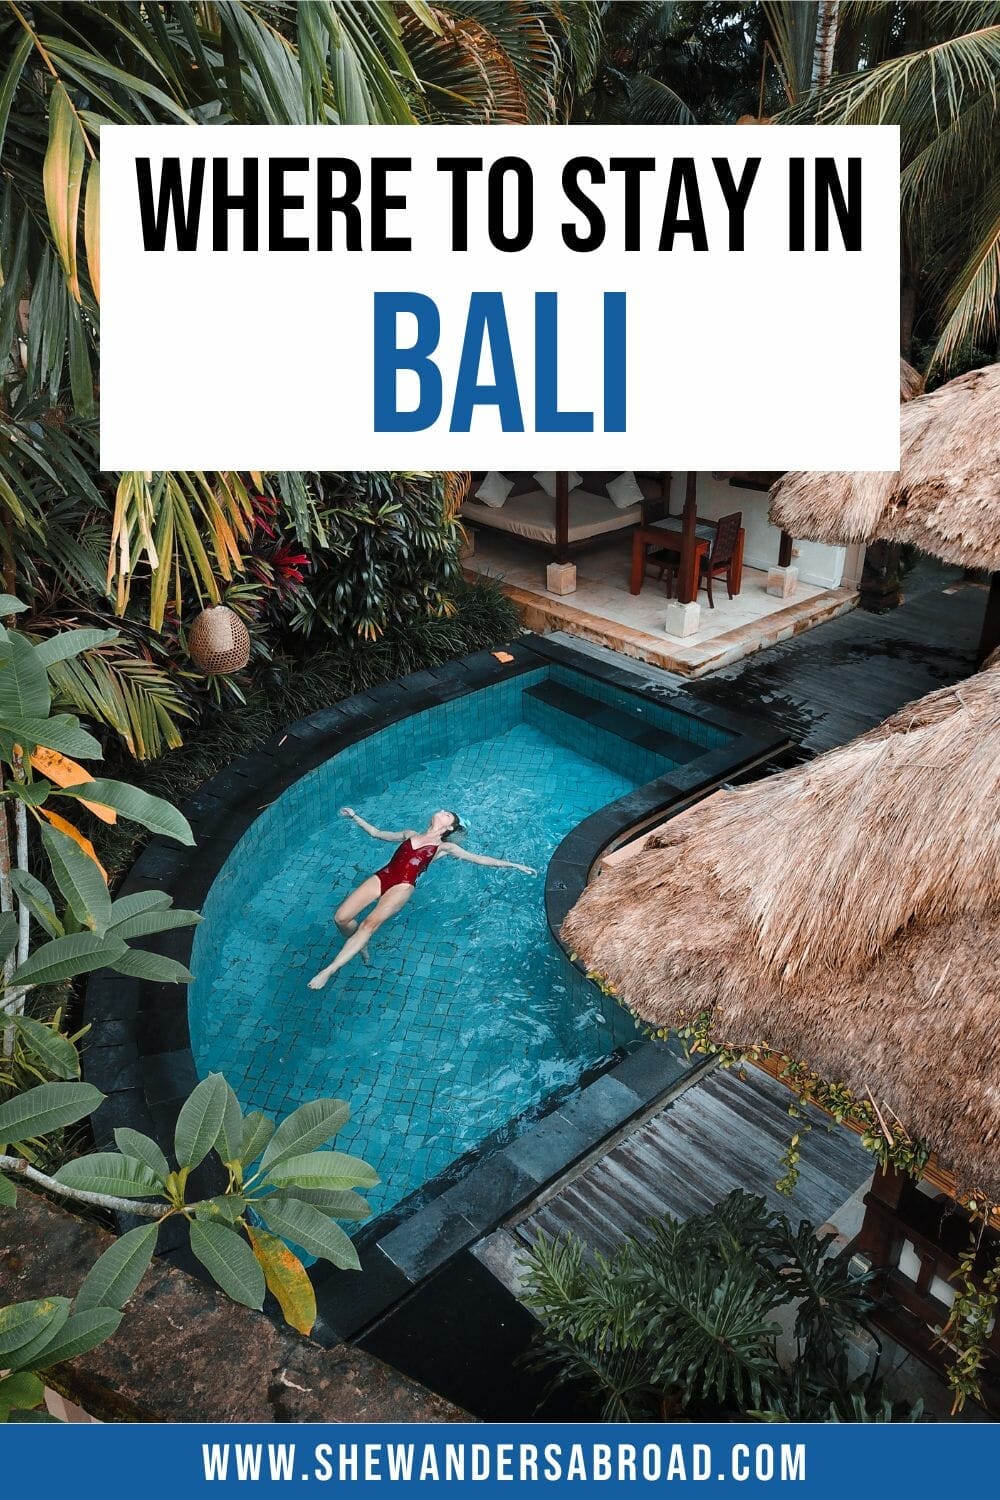 Where To Stay In Bali: 10 Best Areas & Hotels | She Wanders Abroad